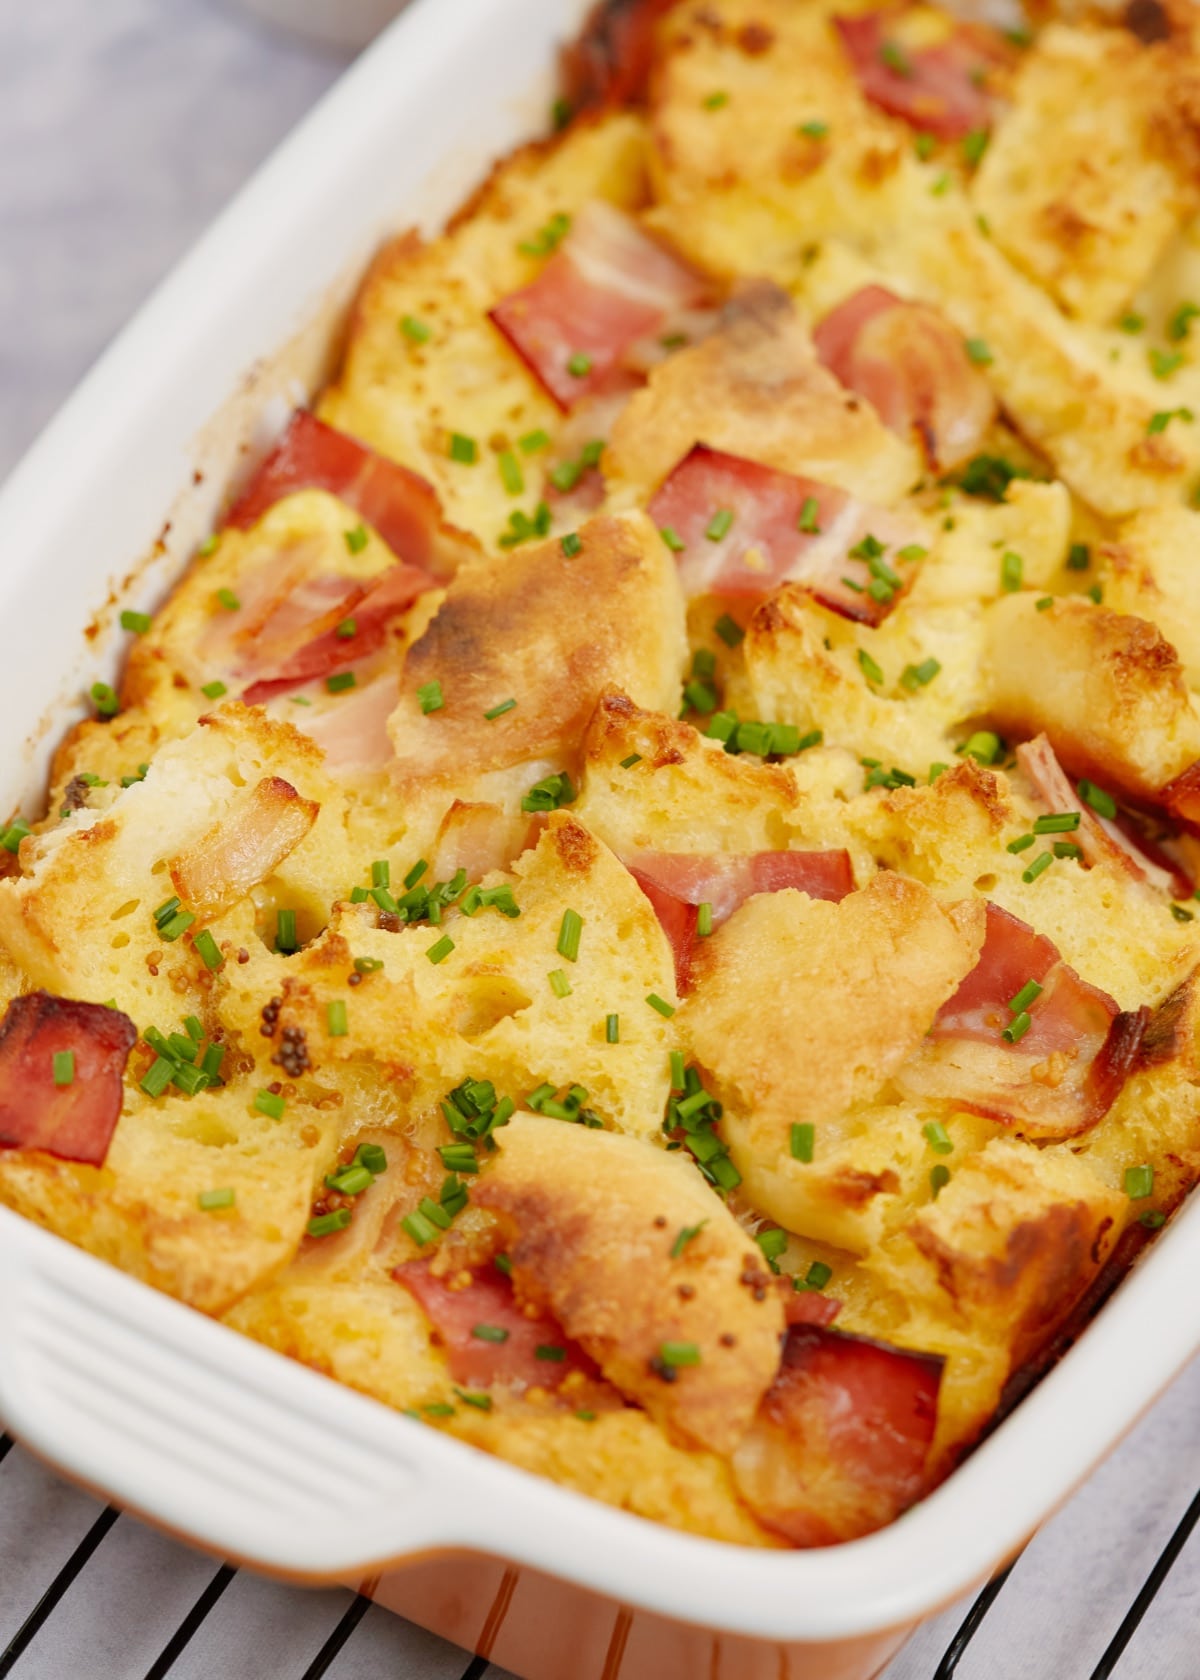 baked eggs benedict casserole in a white baking dish